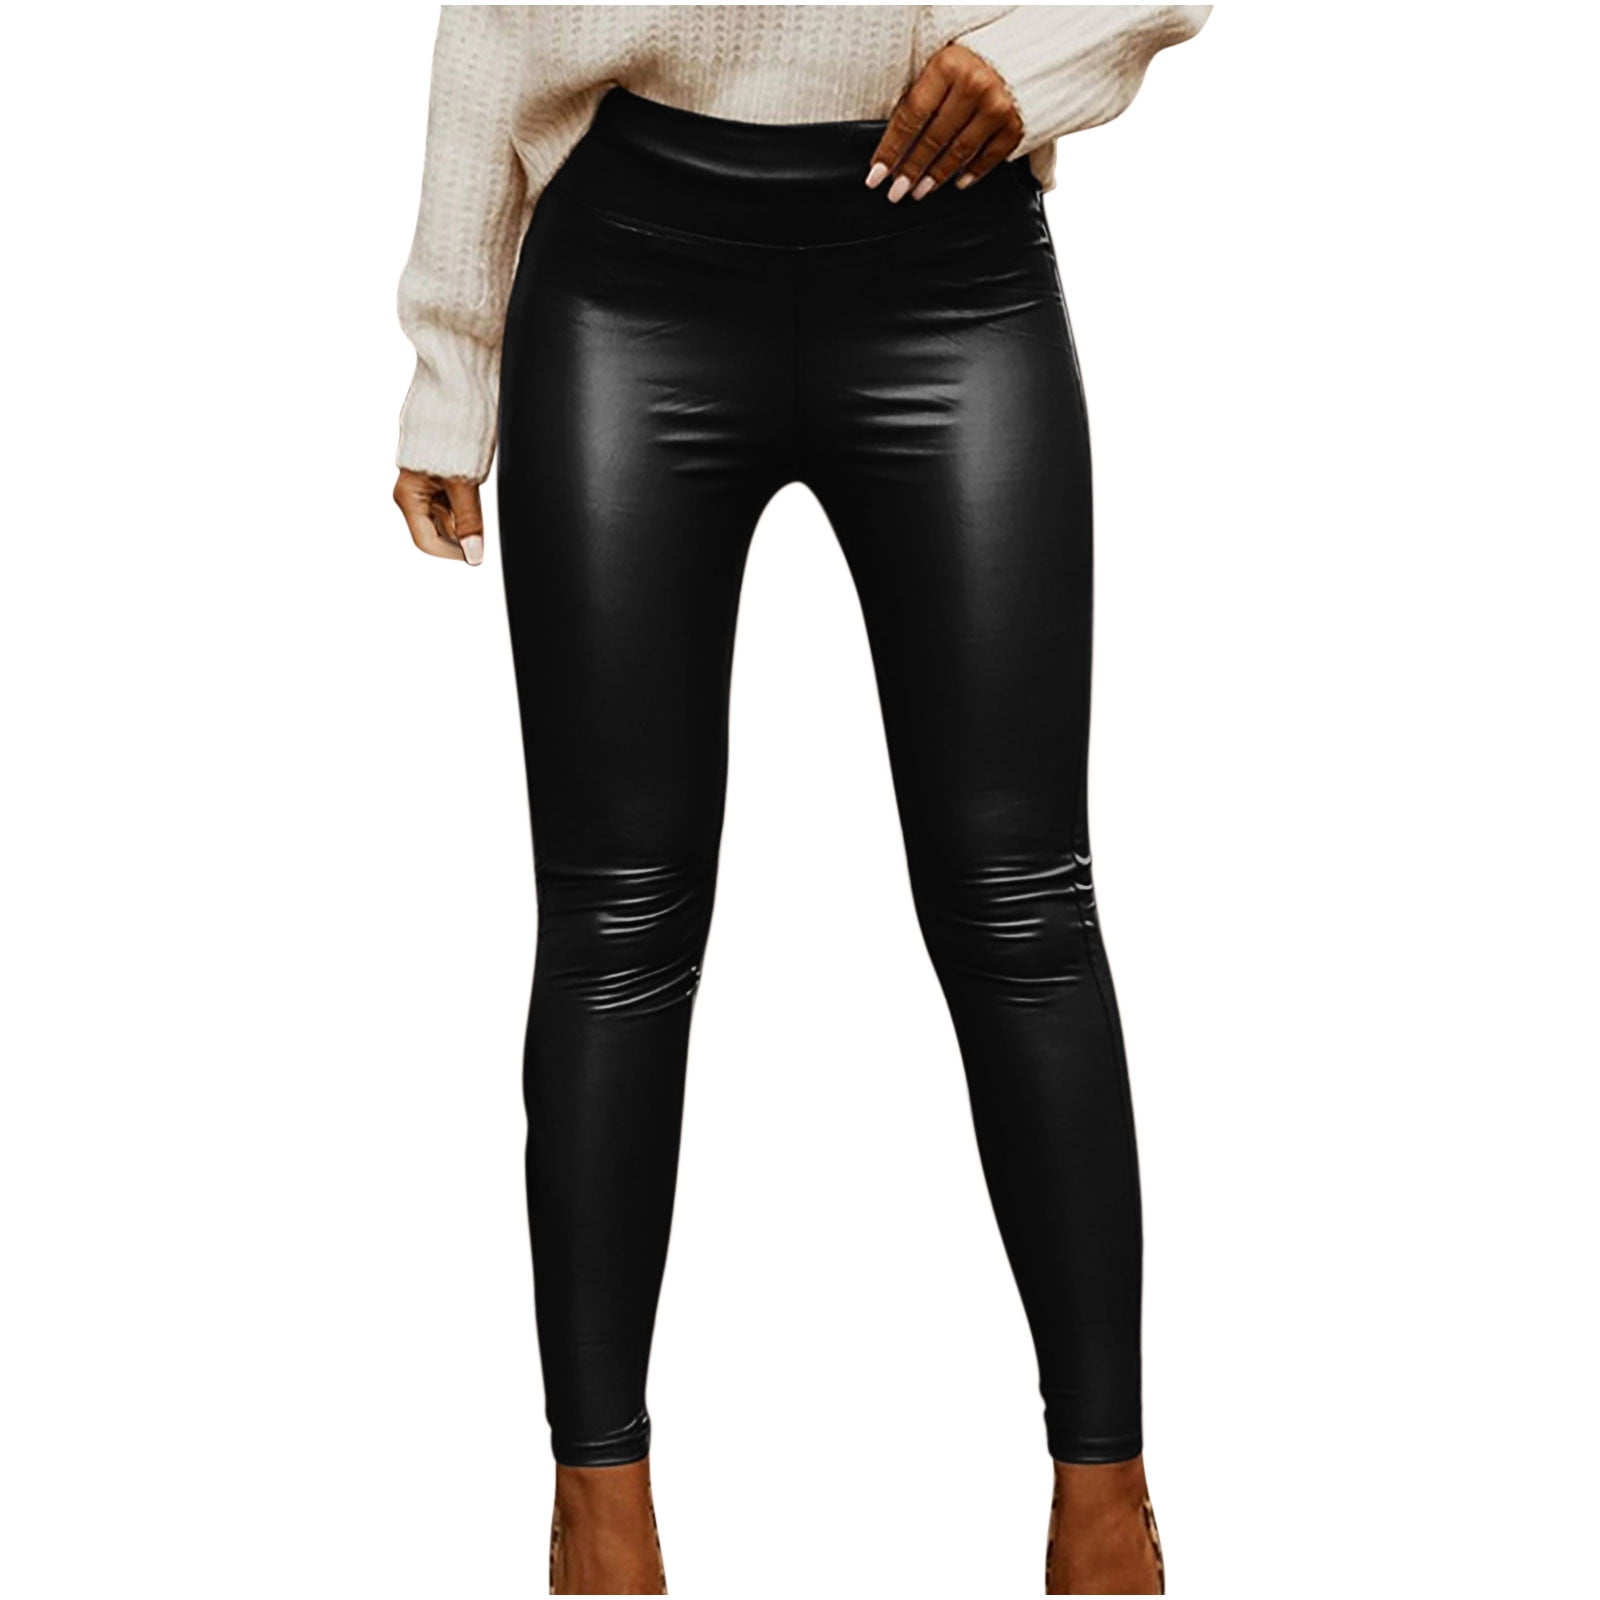 Sexy High Waisted Faux Leather Vegan Leather Leggings For Women Plus Size,  Shiny Finish, Black S 5XL From Jessie06, $8.47